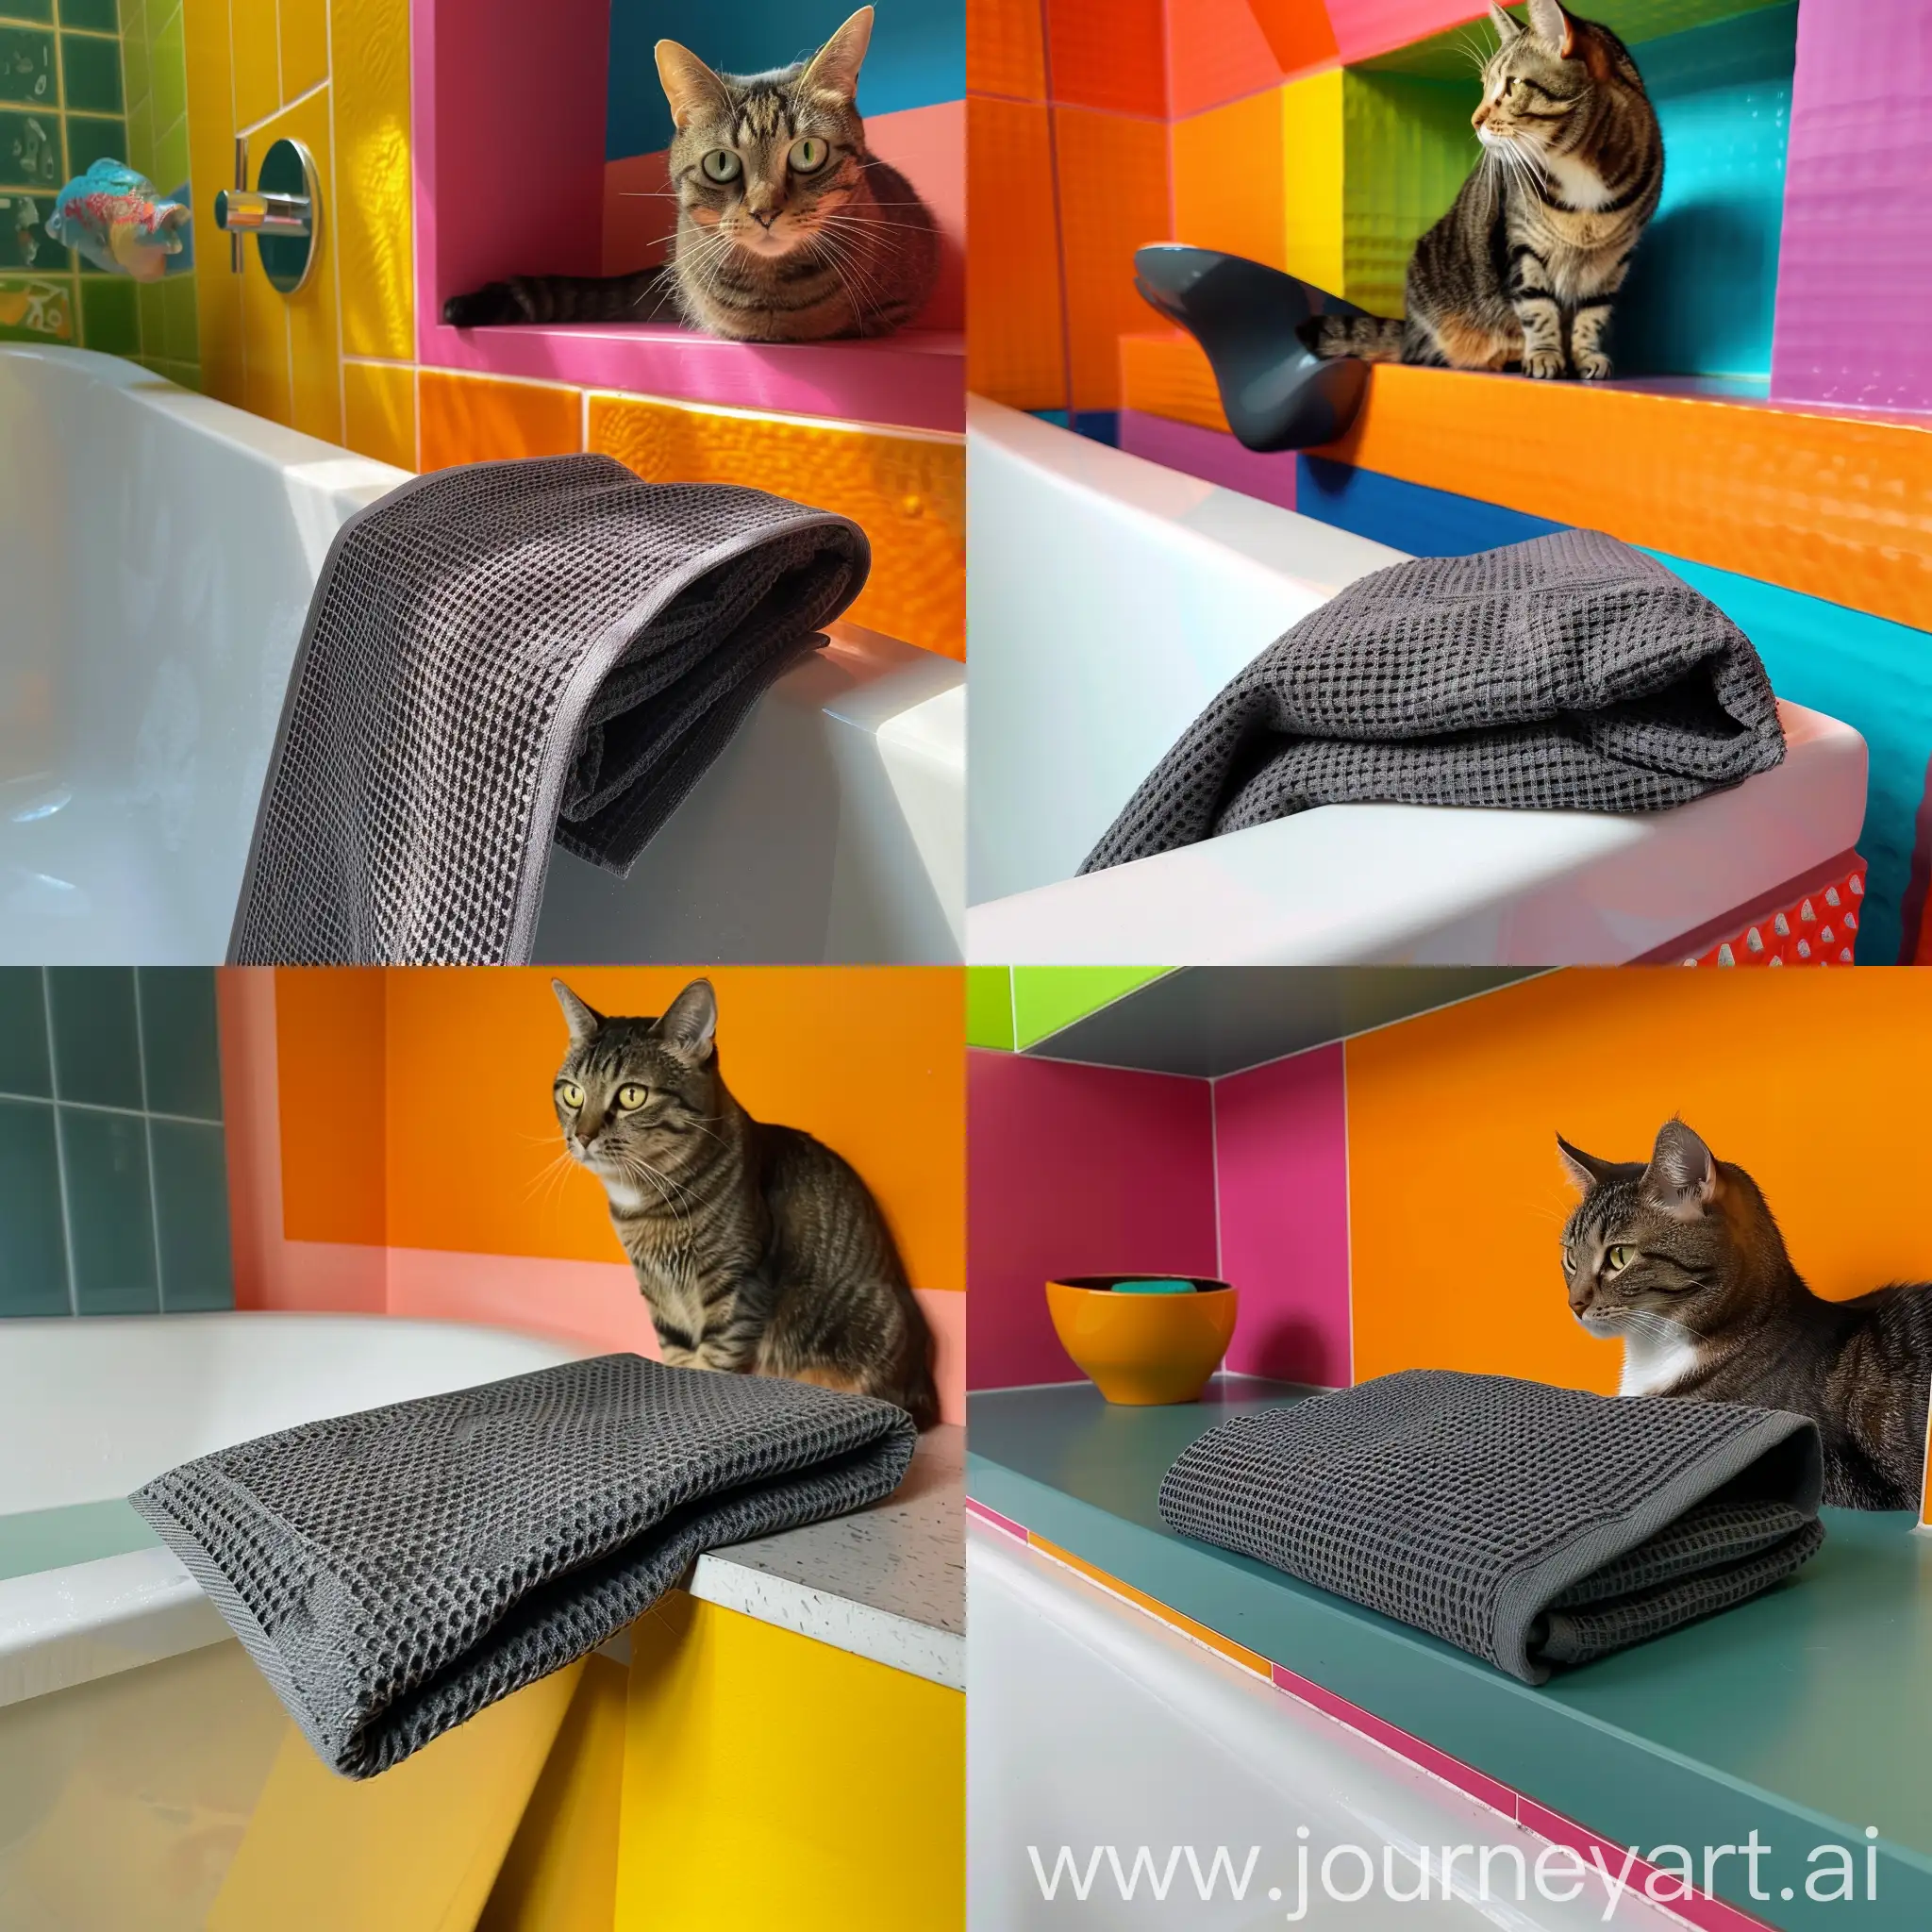 Luxurious-Graphite-Waffle-Towel-in-Brightly-Colored-Bathroom-with-Curious-Cat